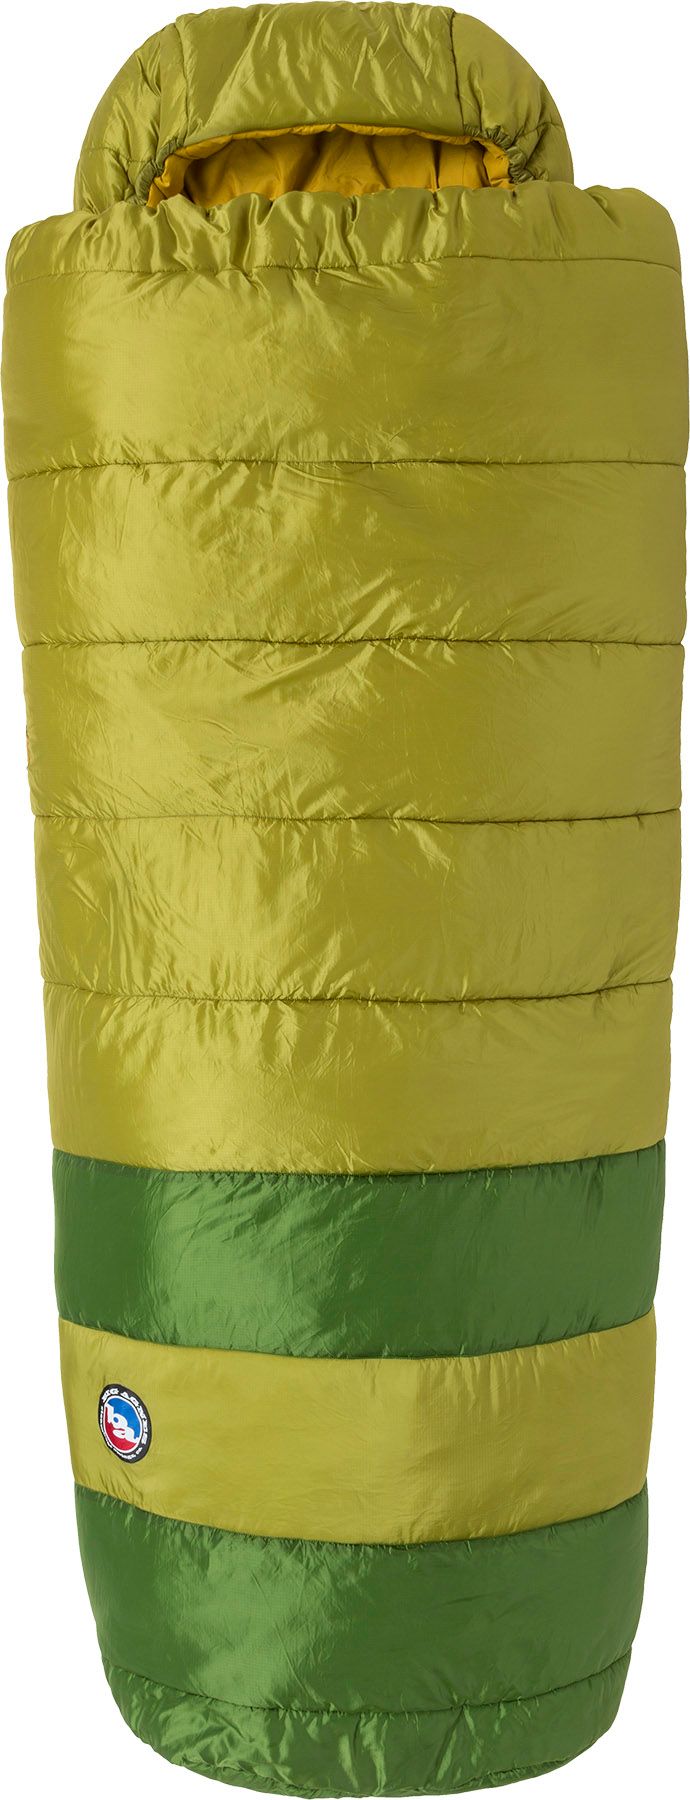 Photos - Suitcase / Backpack Cover Big Agnes Echo Park 0° Wide Long Sleeping Bag, Men's, Green/Olive 21TUMUCH 